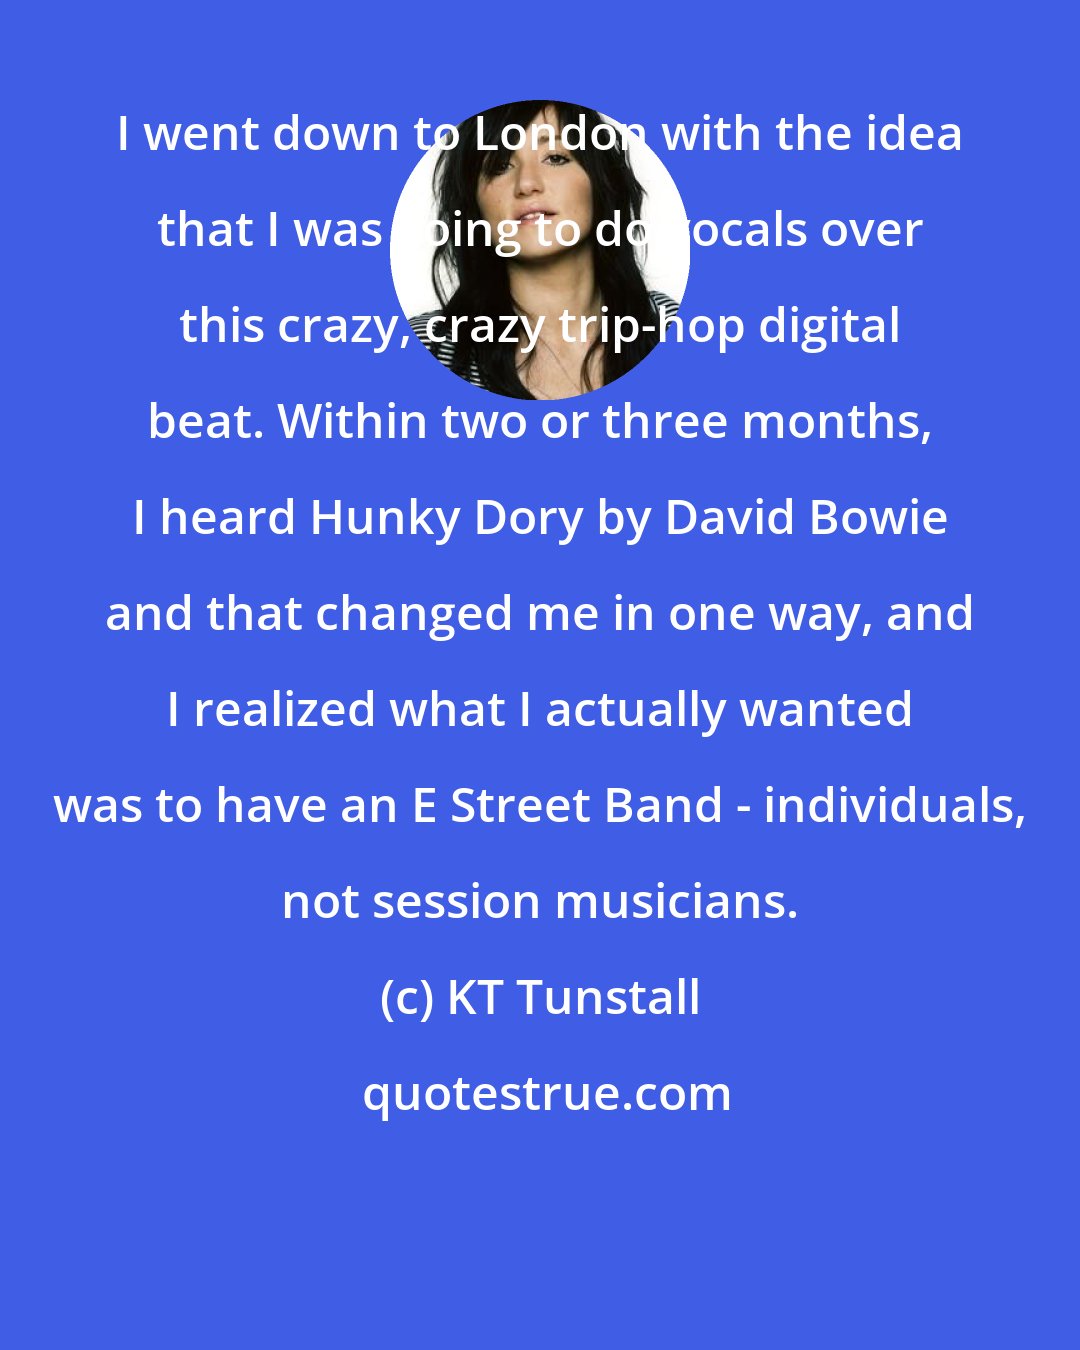 KT Tunstall: I went down to London with the idea that I was going to do vocals over this crazy, crazy trip-hop digital beat. Within two or three months, I heard Hunky Dory by David Bowie and that changed me in one way, and I realized what I actually wanted was to have an E Street Band - individuals, not session musicians.